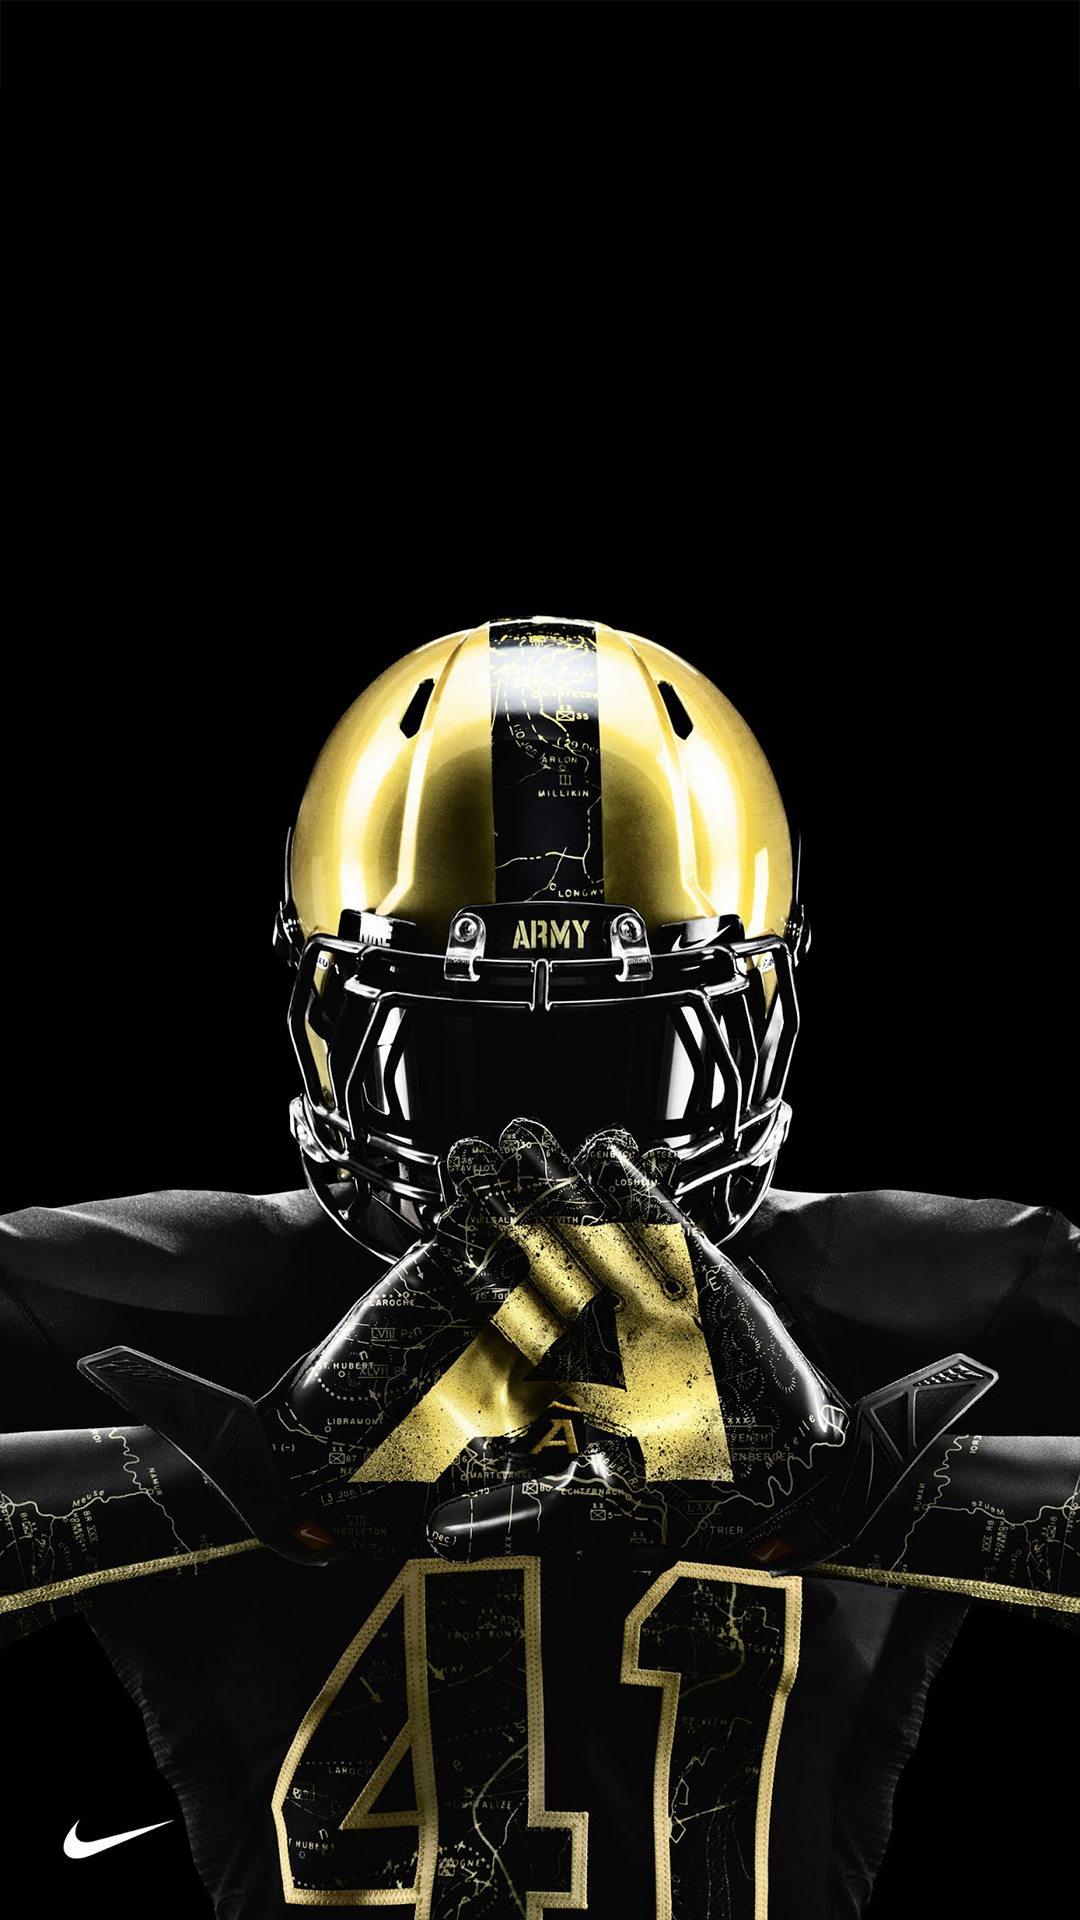 Army Nike Gloves Htc One Wallpaper - Cool Football Wallpapers For Iphone - HD Wallpaper 